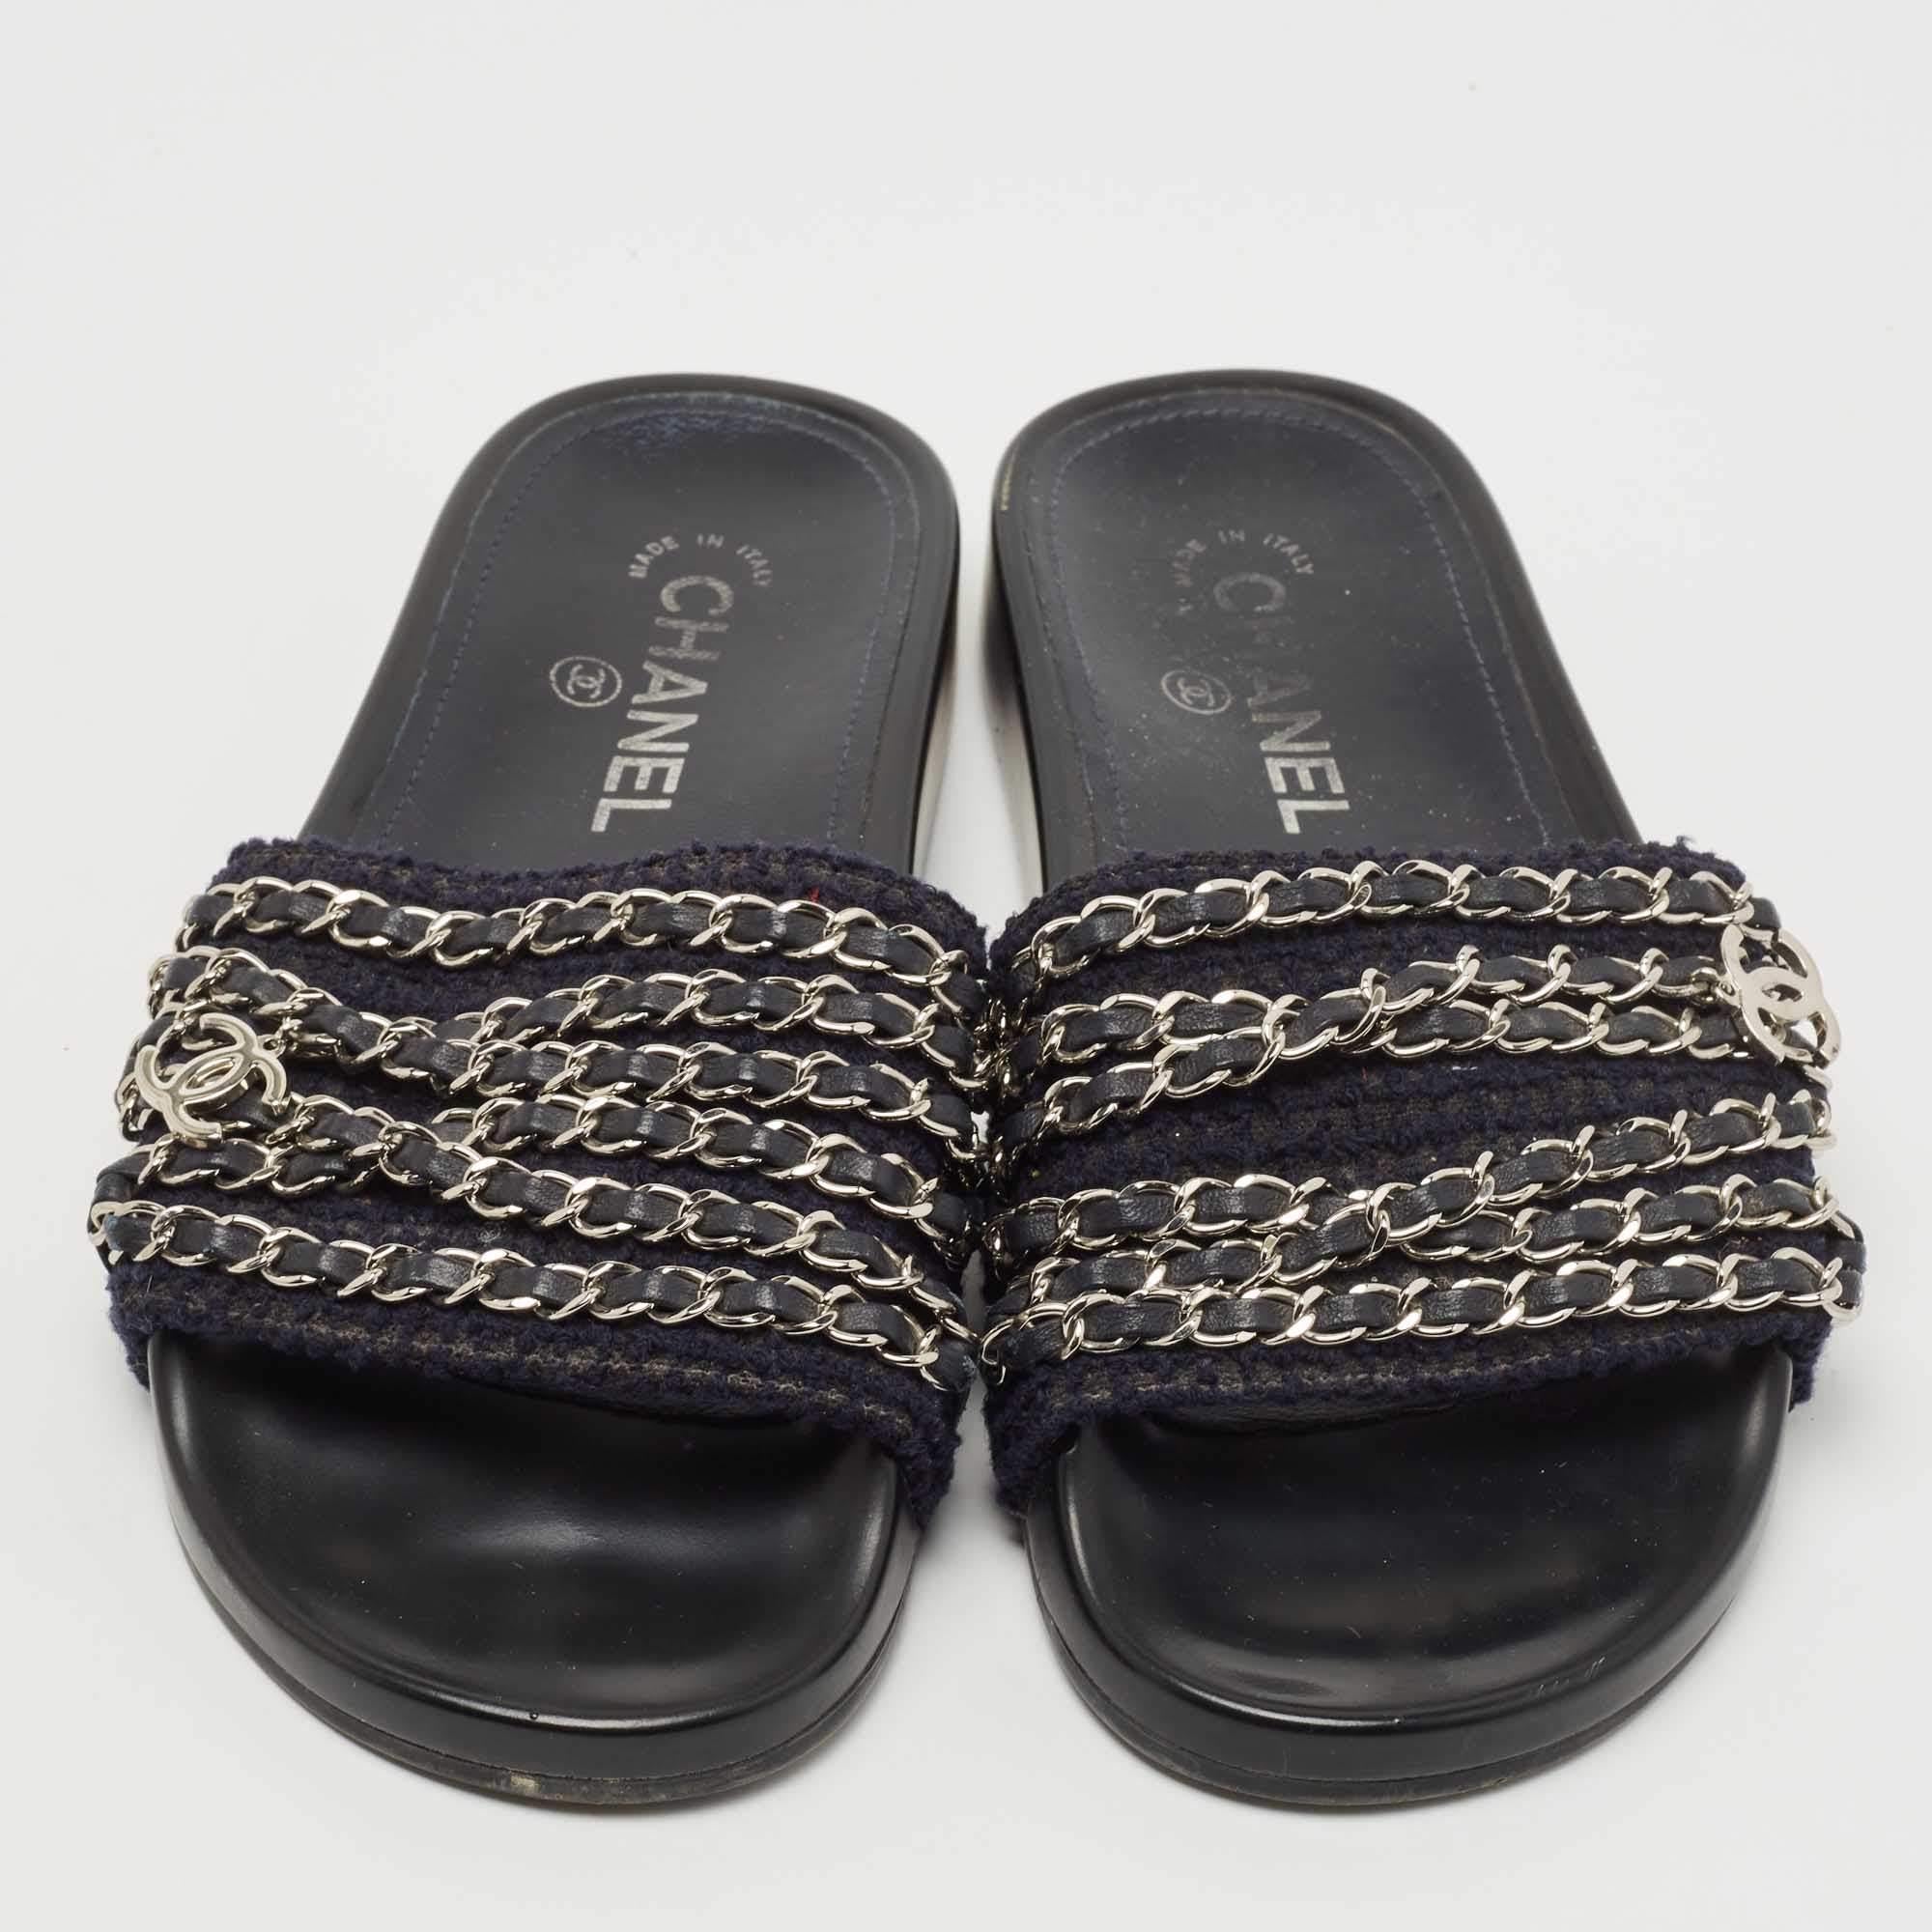 Stay comfortable throughout the day in effortless luxury with these Chanel Tropiconic slides. Designed with a tweed front strap and a durable rubber sole, these slides are finished with woven chains on the uppers.

